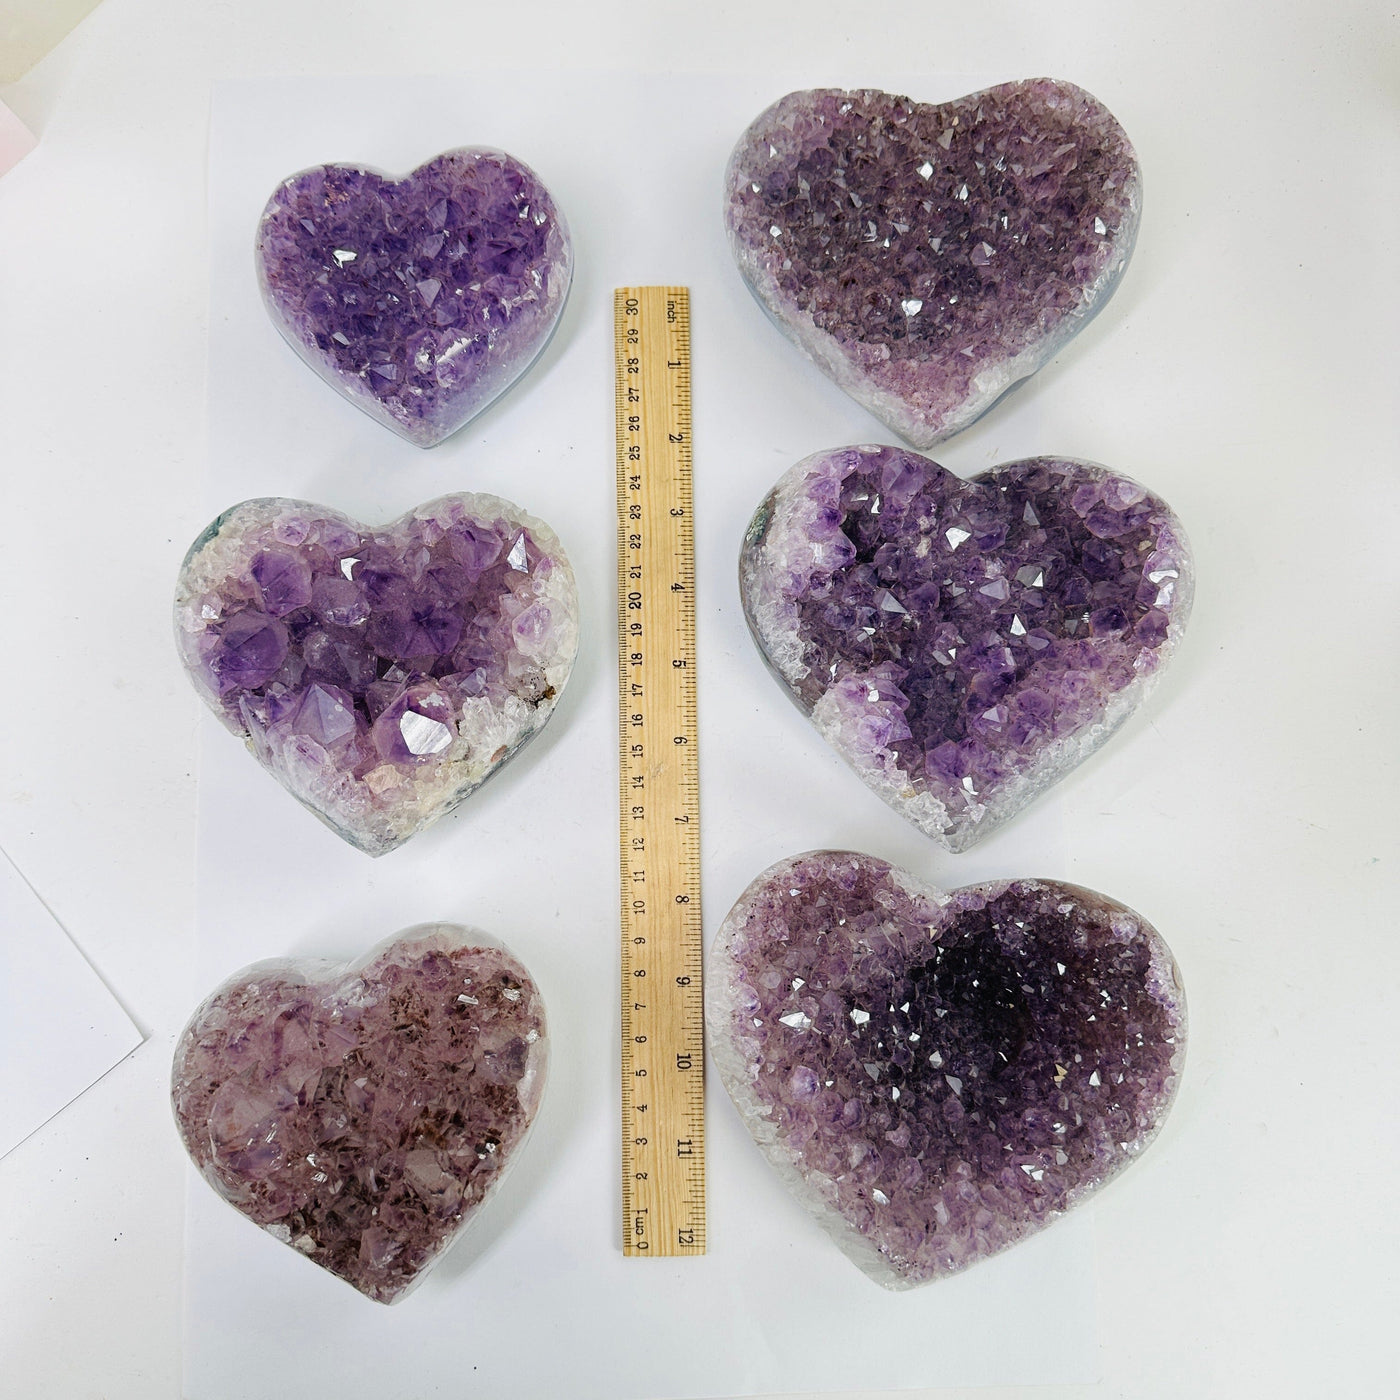 amethyst hearts next to a ruler for size reference